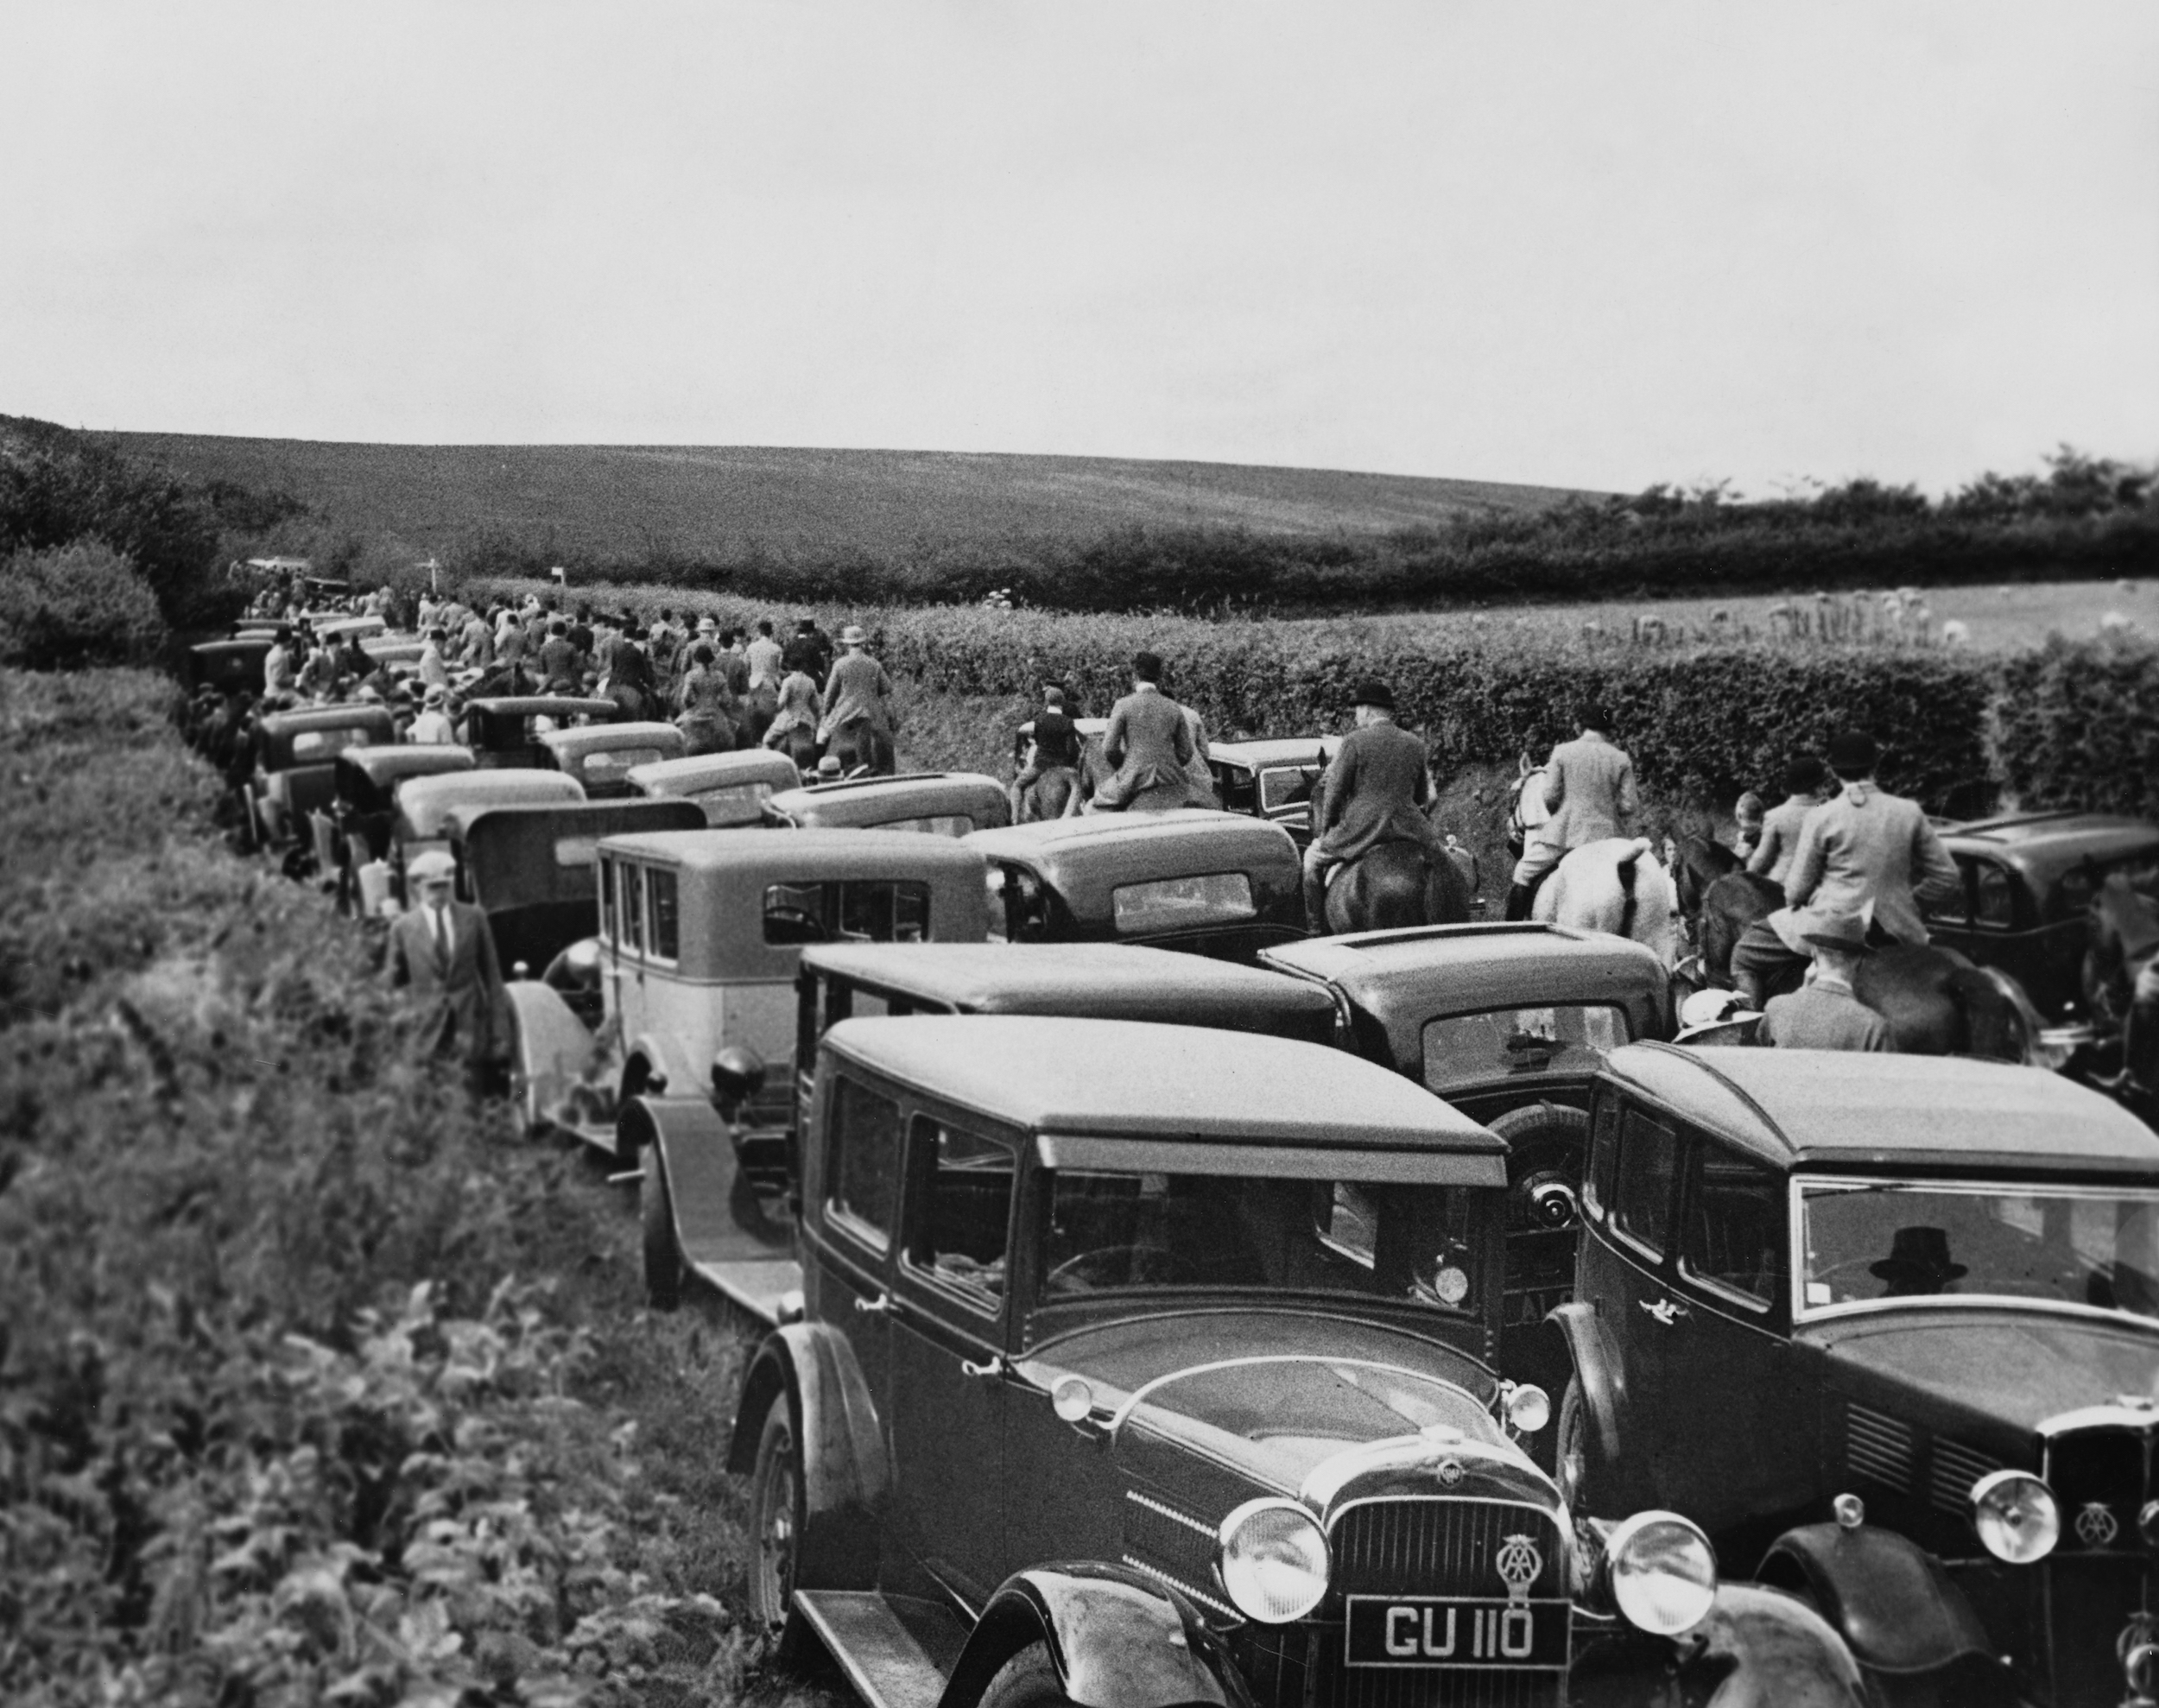 Cars and horseback riders share a packed country road in 1935.